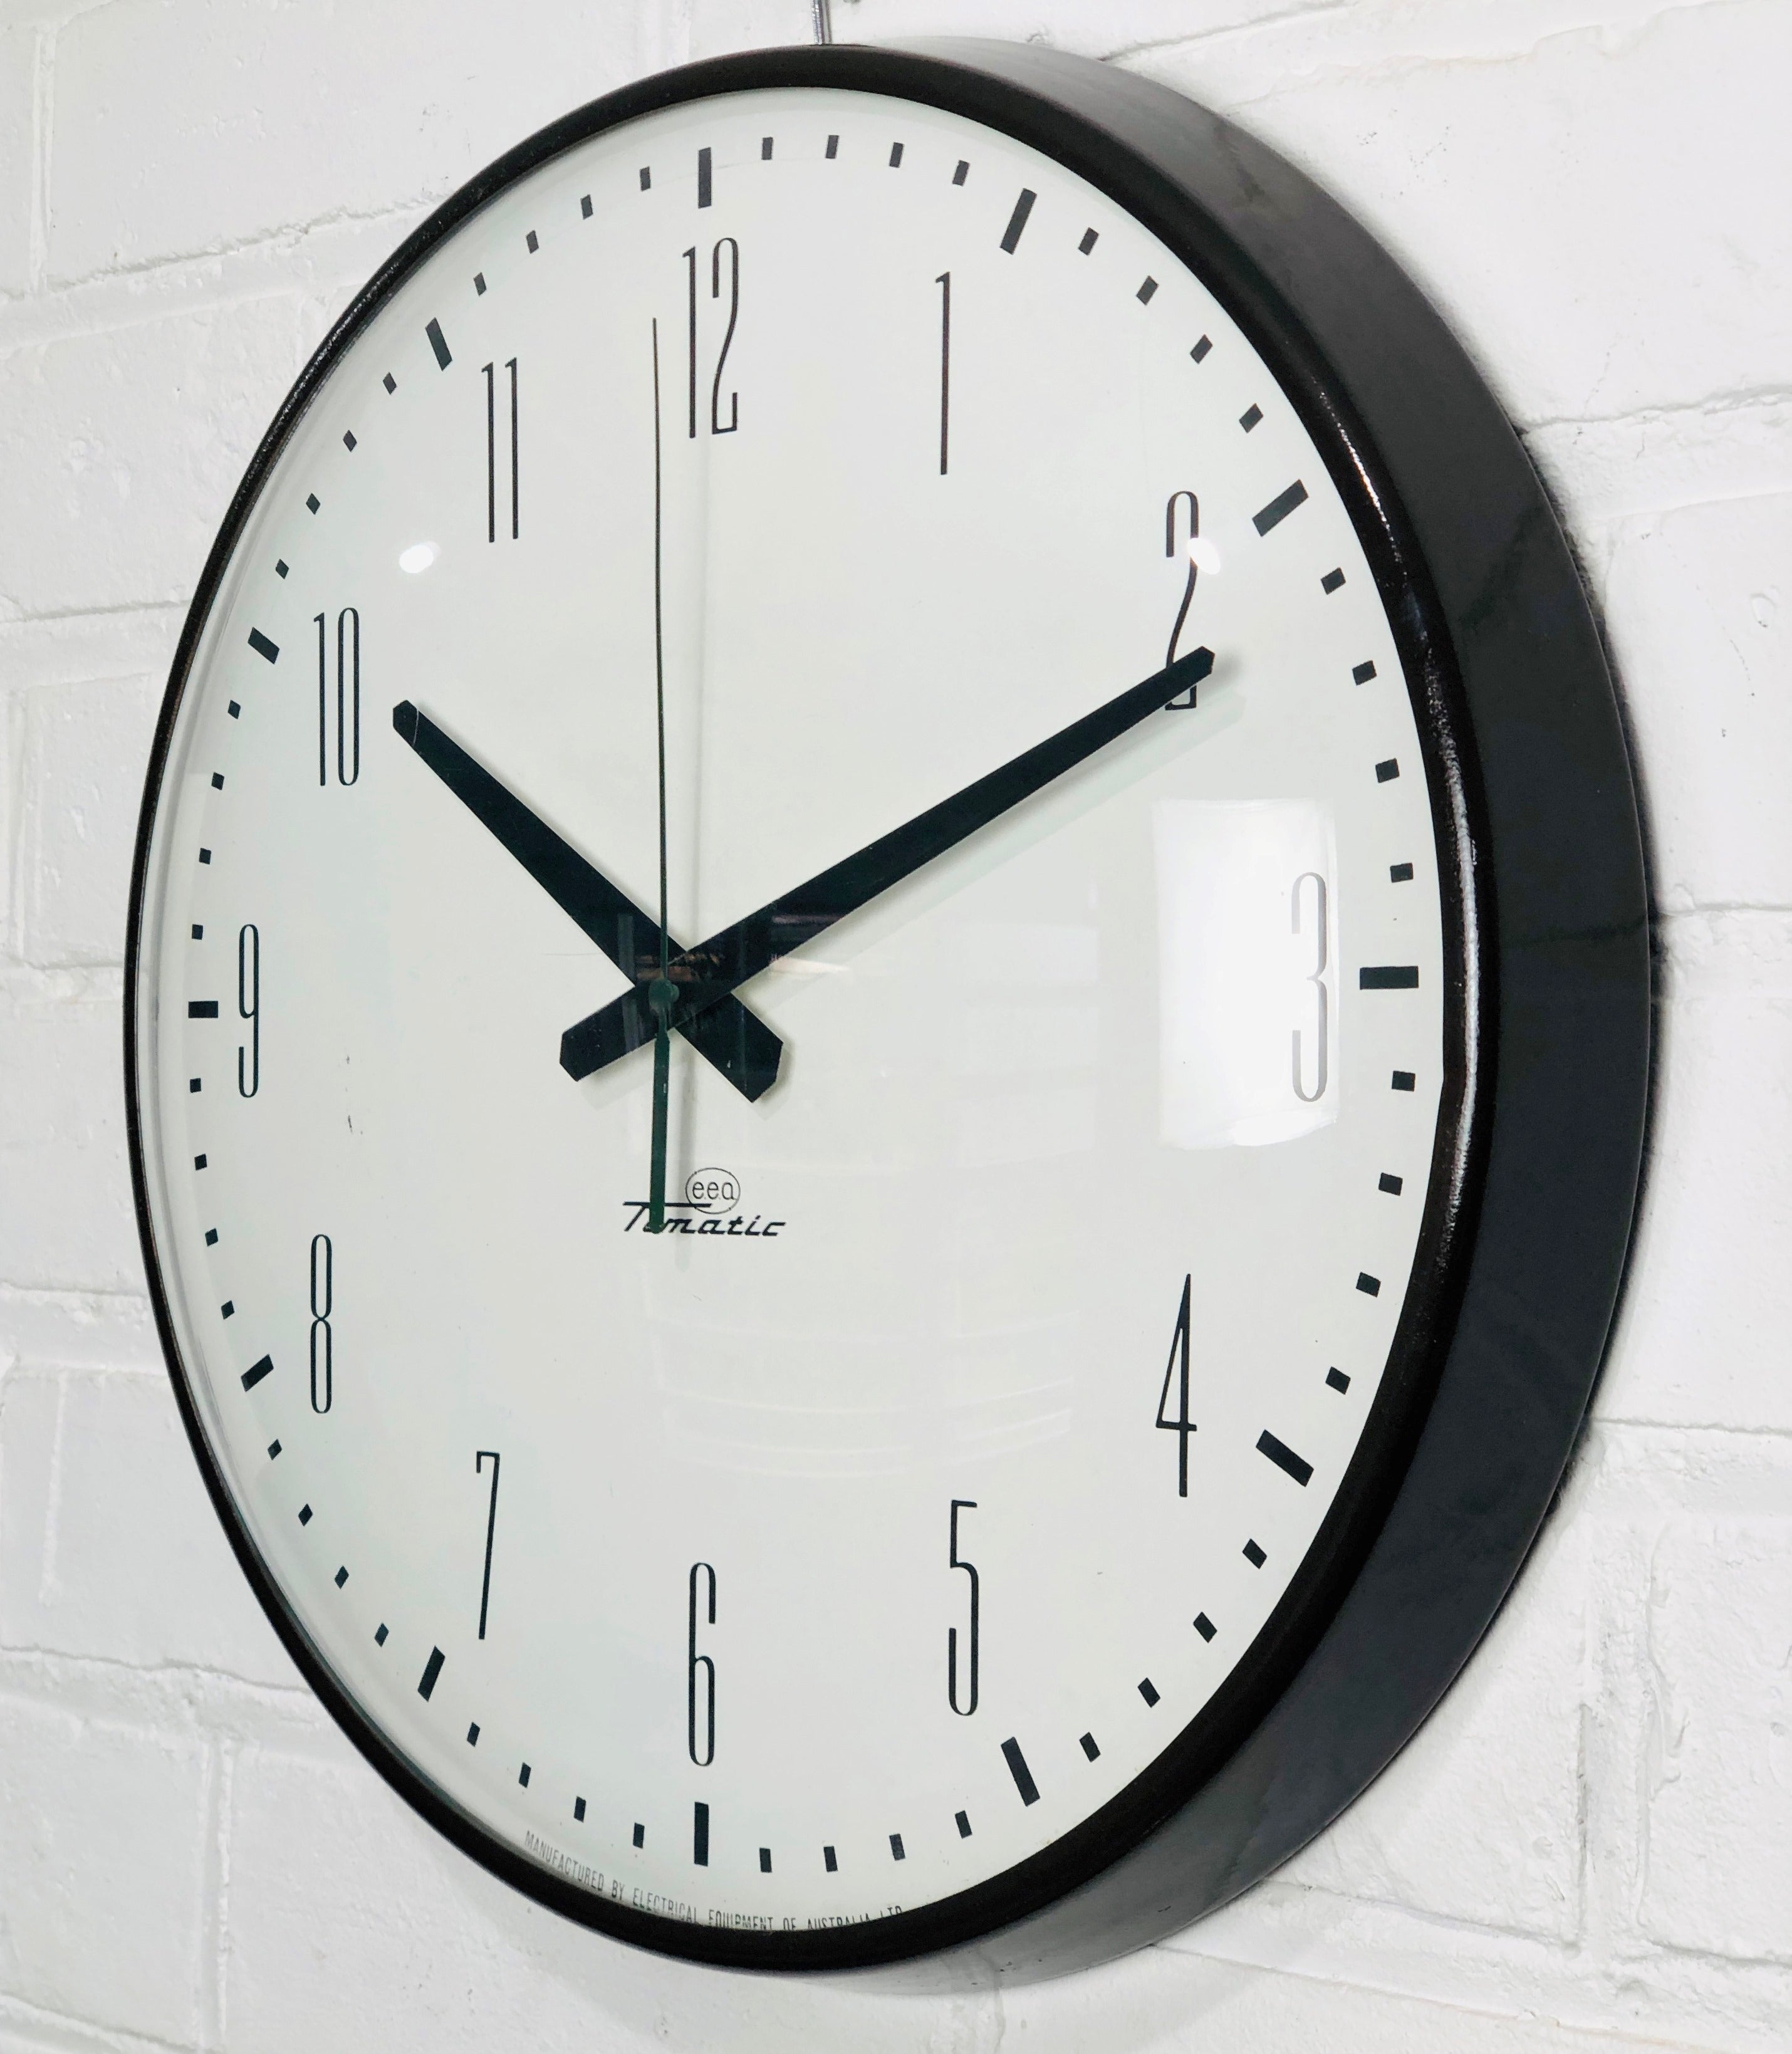 Vintage TIMATIC Battery Station Wall School Clock | eXibit collection